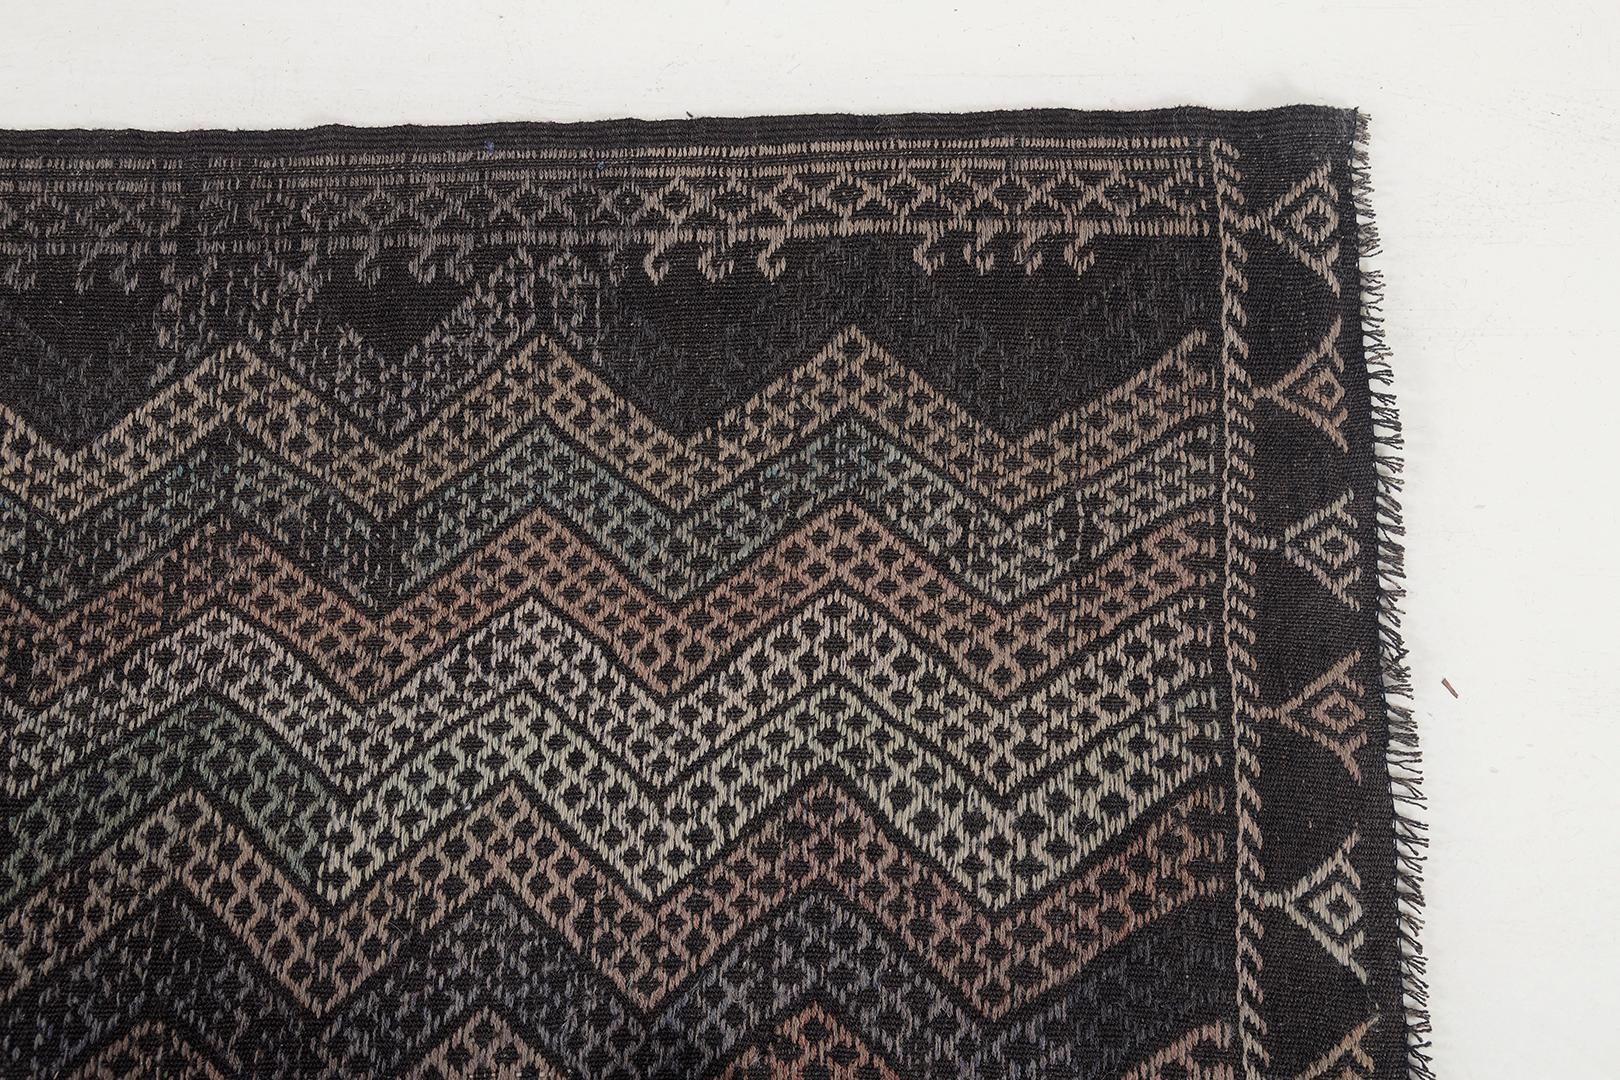 Featuring an alluring artsy effect, this Vintage Turkish Anatolian Jejim Kilim rug adds texture and delicate graphic appeal forming a warm and distinctive space. The textured field is covered in an all-over zigzag pattern across the relaxing